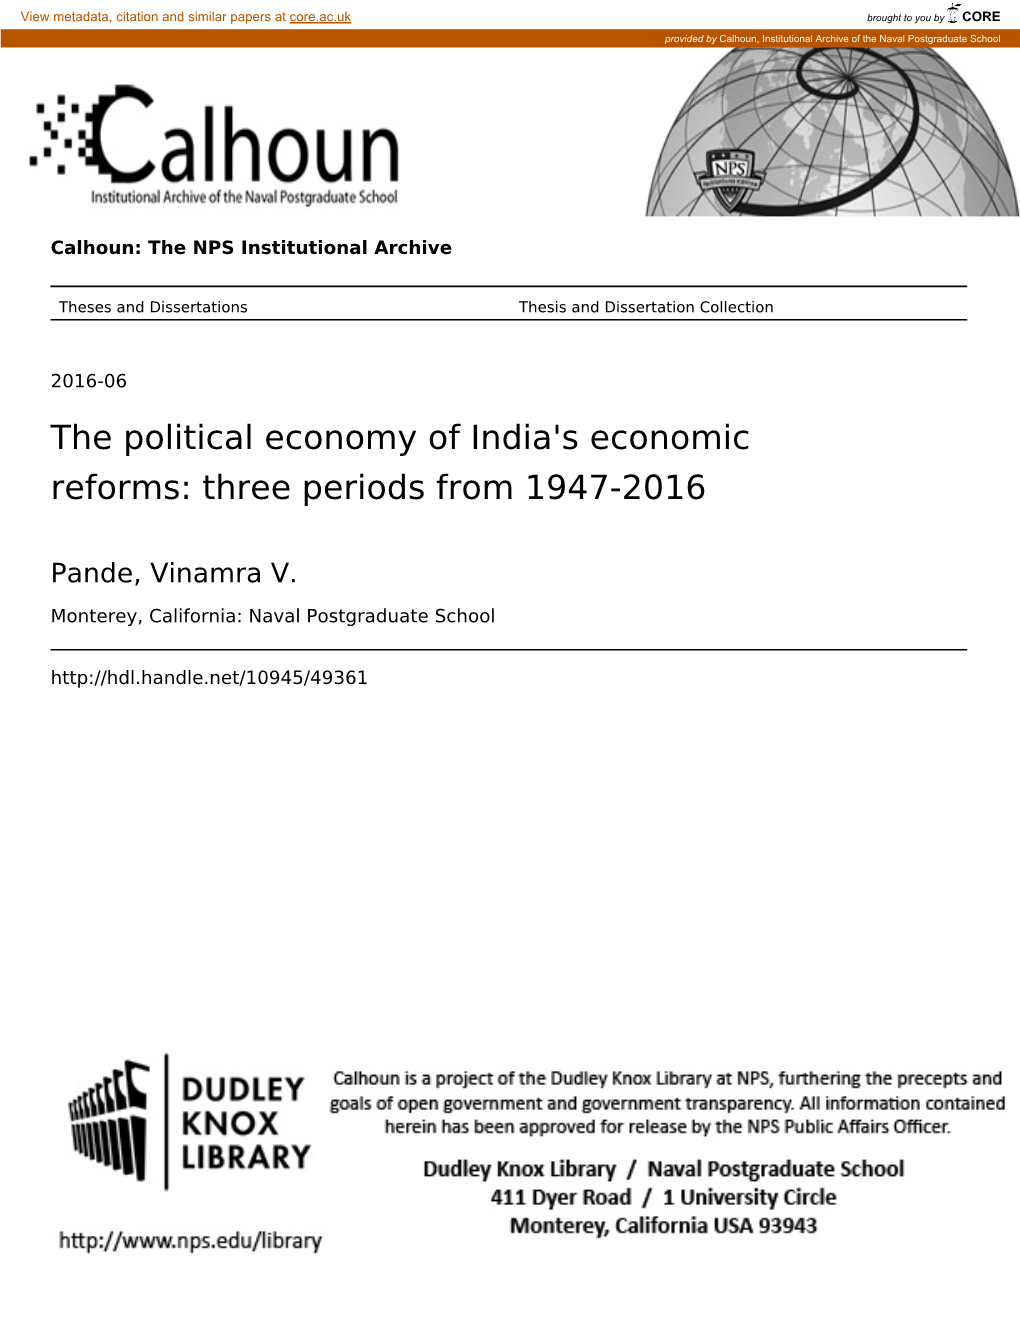 The Political Economy of India's Economic Reforms: Three Periods from 1947-2016